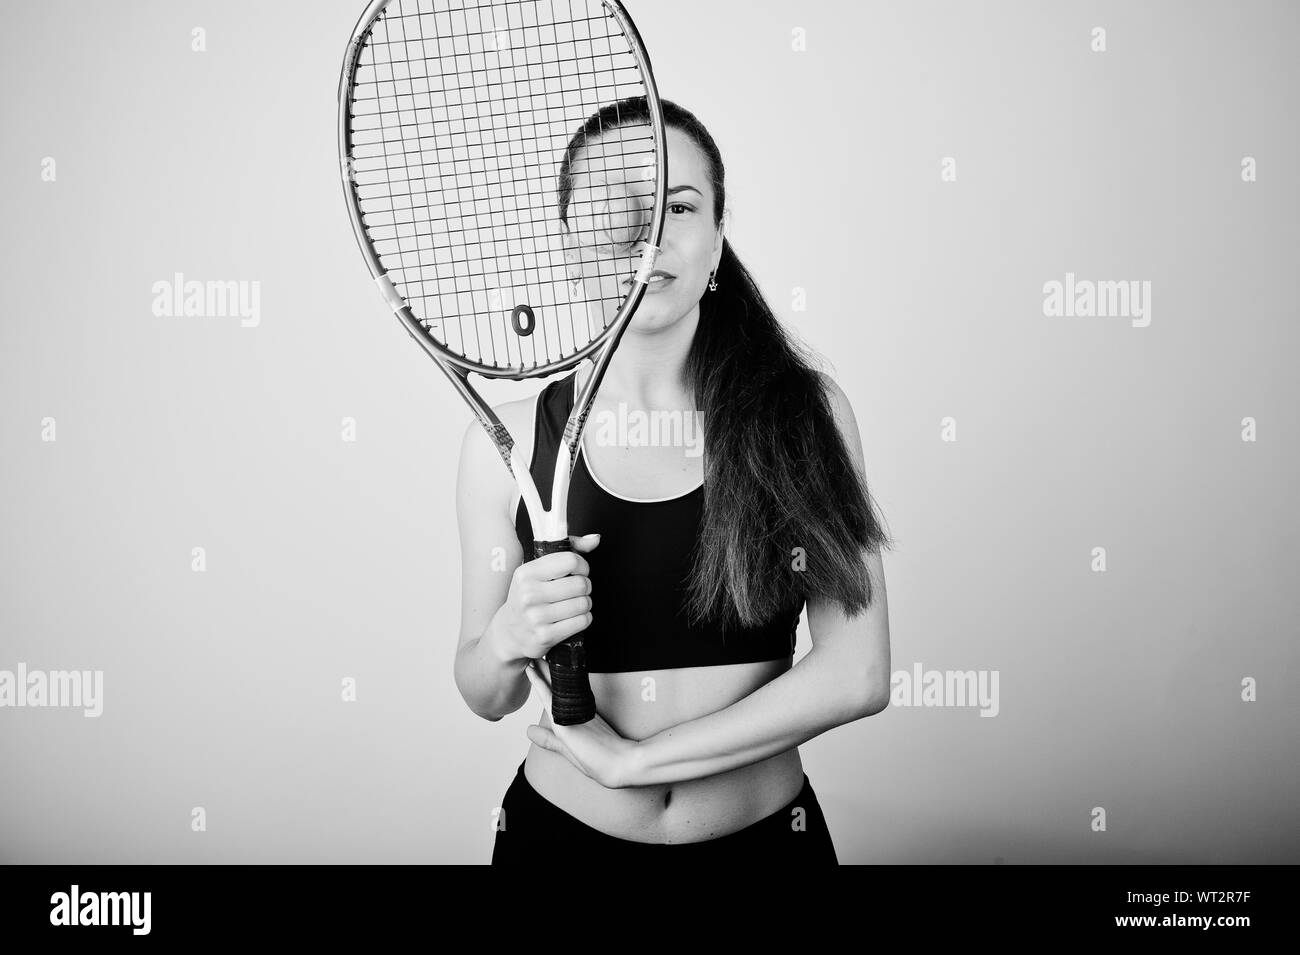 Beautiful Young Woman In Sports Clothing Holding Tennis Racket On